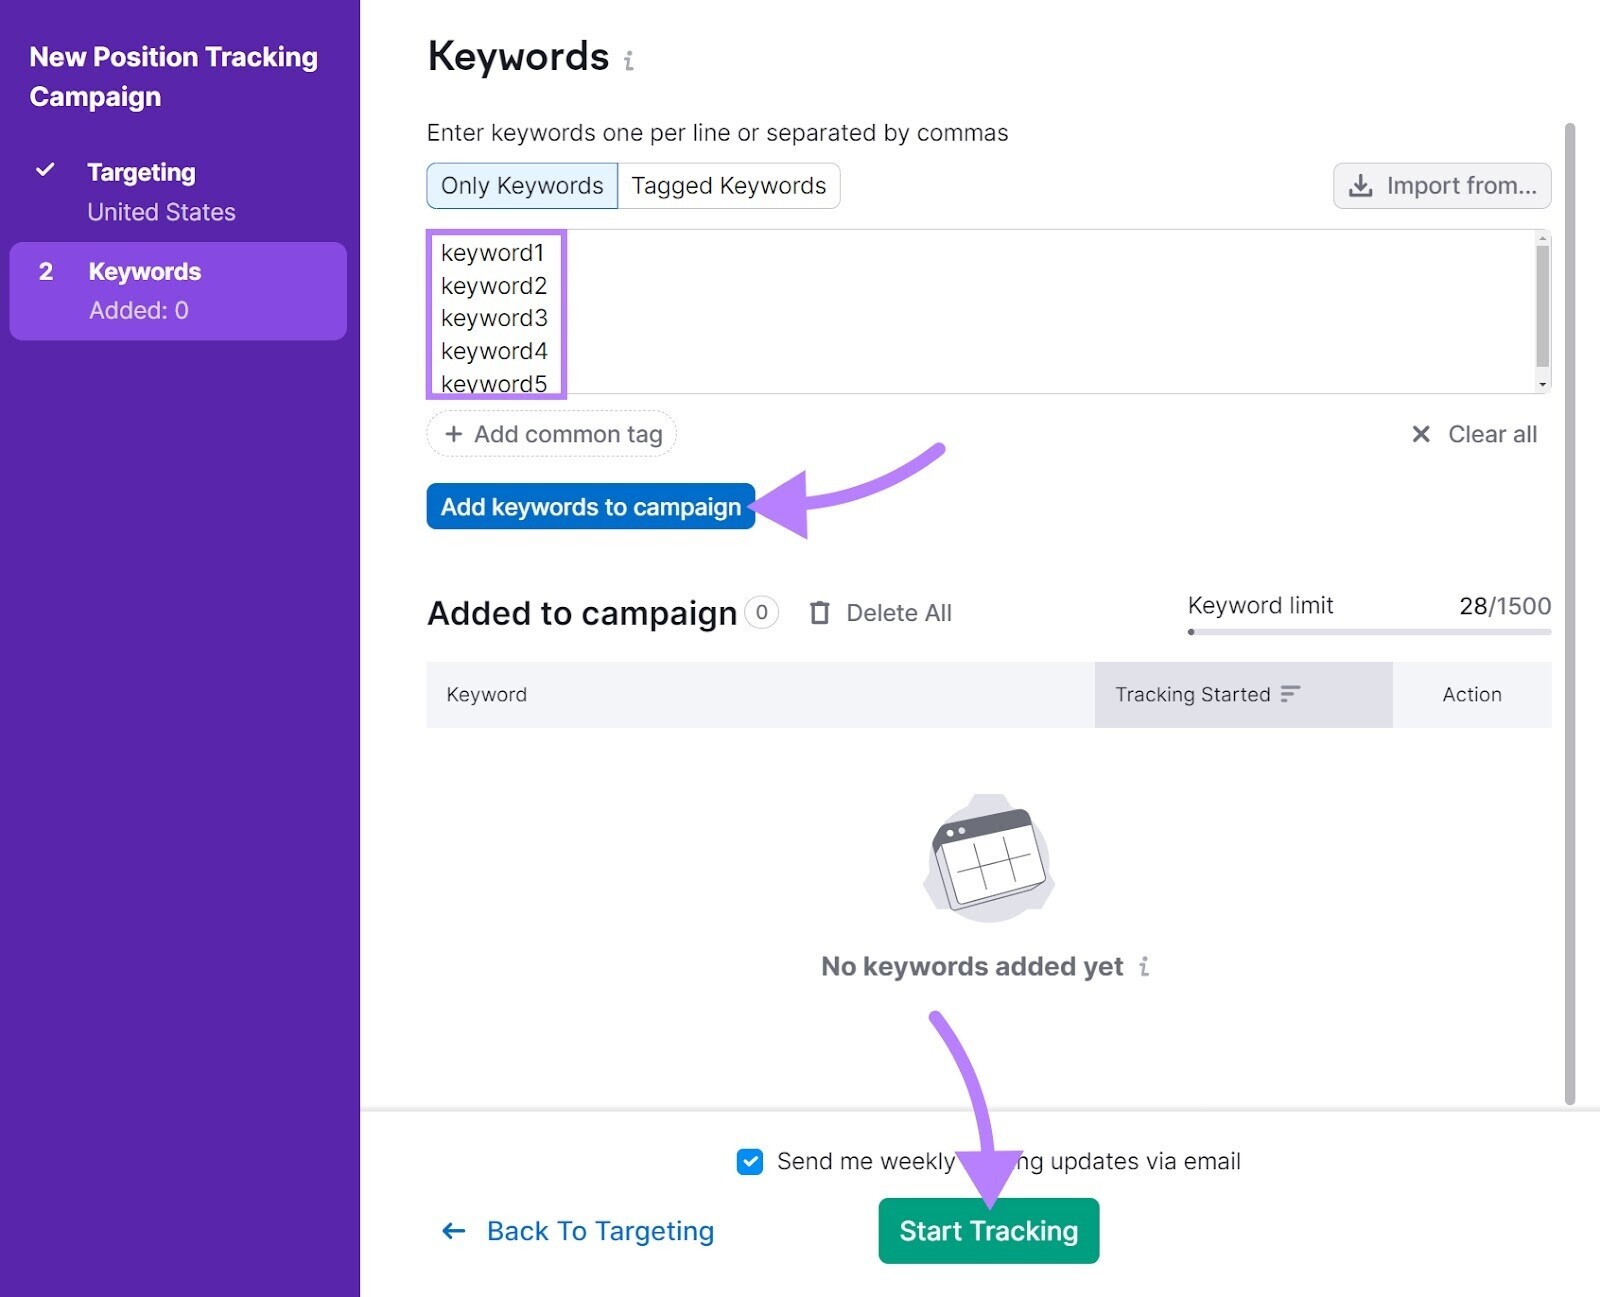 "Keywords" window in Position Tracking configuration steps